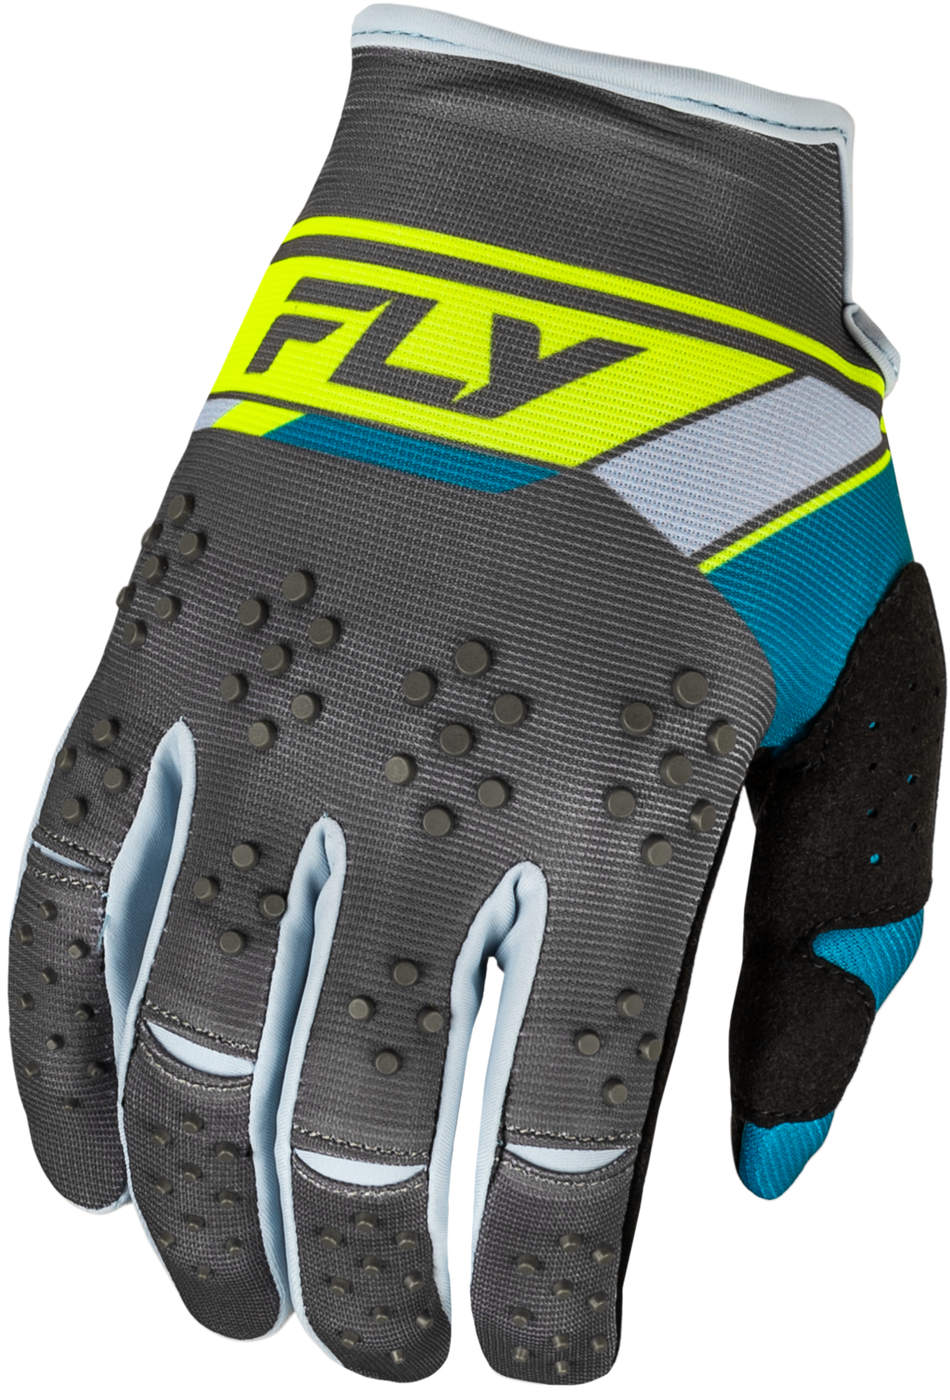 FLY RACING Youth Kinetic Prix Gloves Charcoal/Hi-Vis Yl 377-411YL